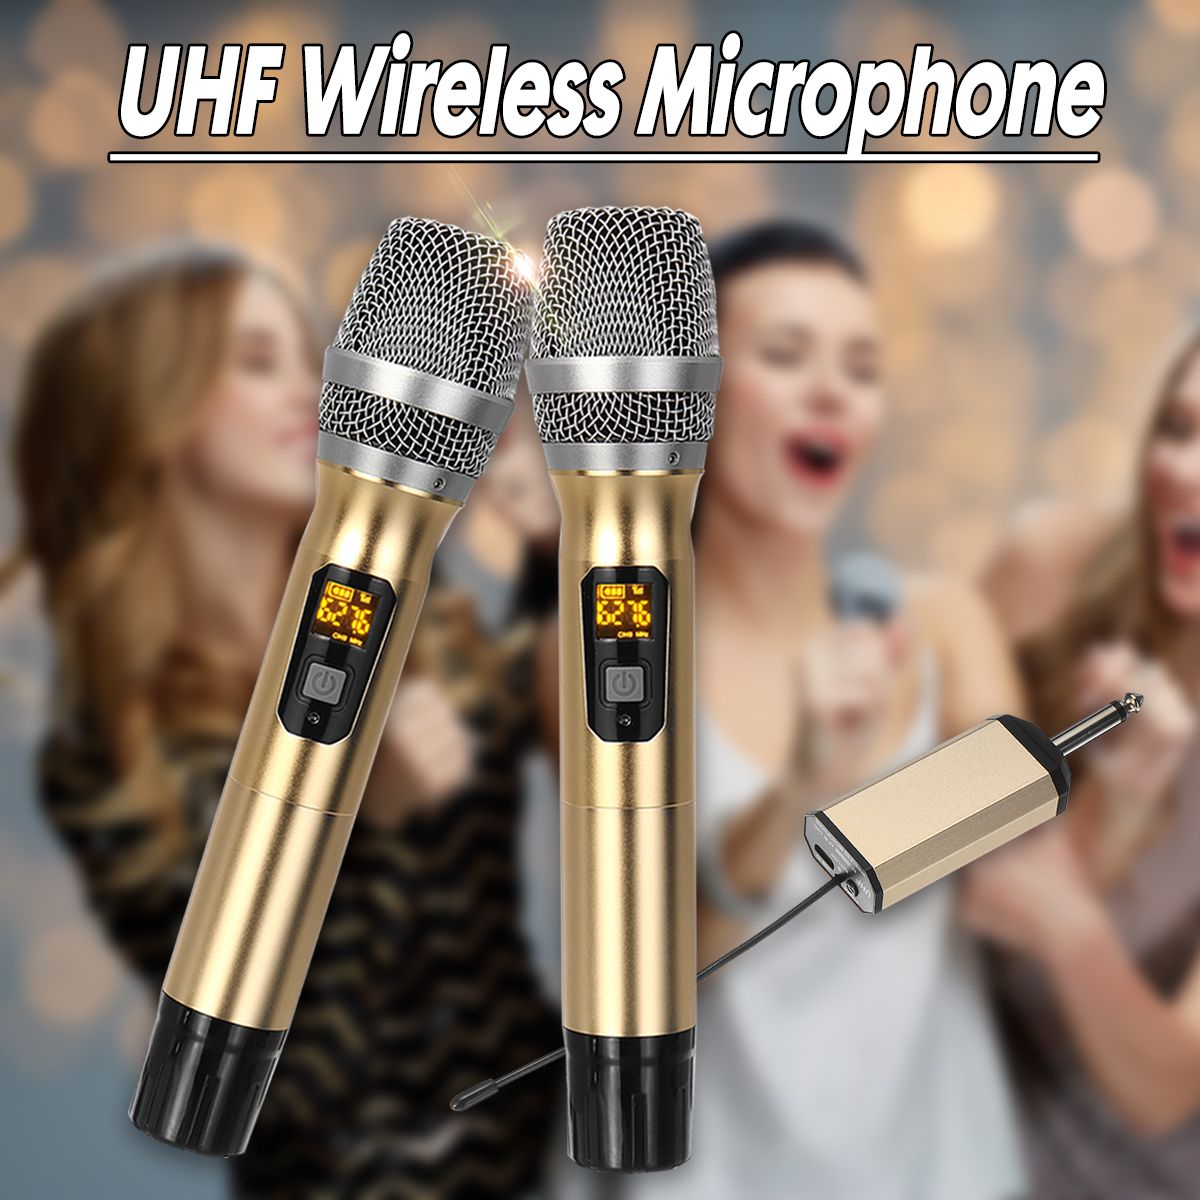 Portable-UHF-Wireless-Microphone-System-2-Handheld-Mics-Speaker-Player-with-Digital-Receiver-for-Sta-1530134